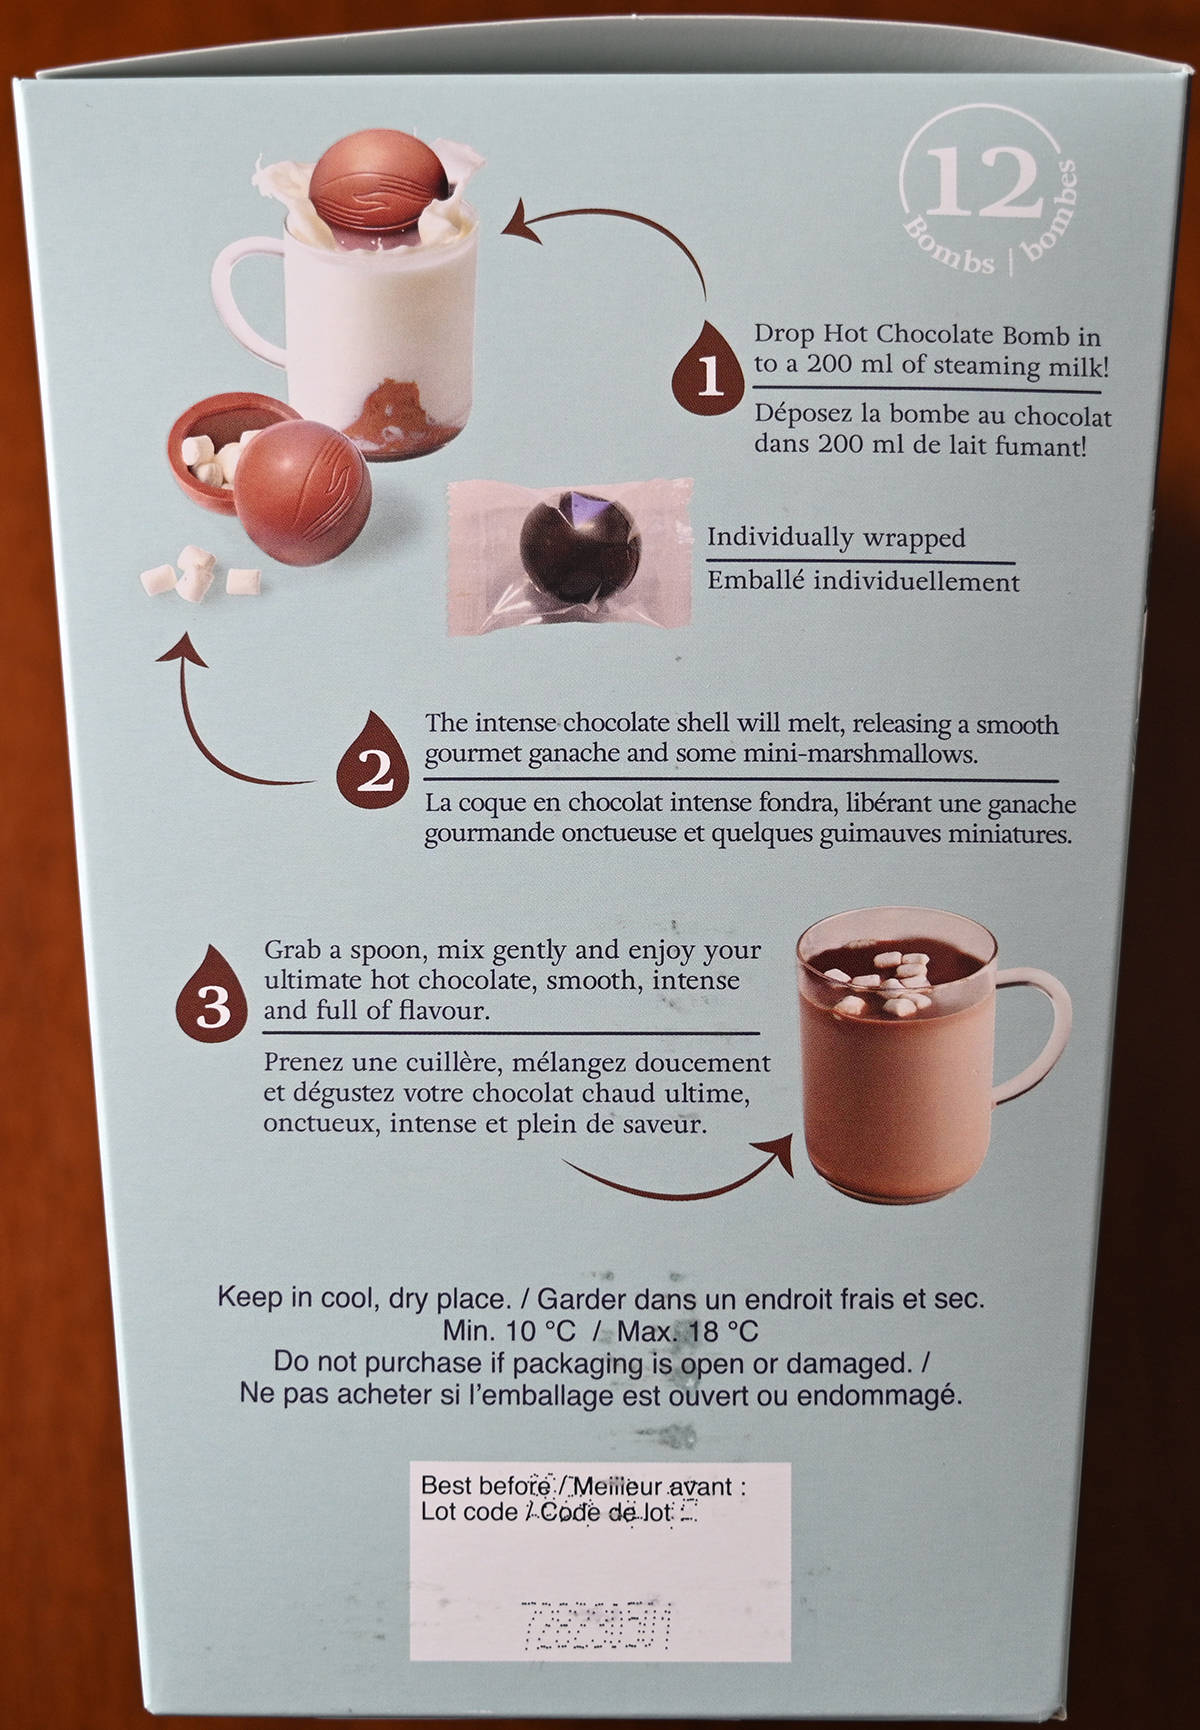 Image of the back of the box showing the directions on how to make the hot chocolate with the bombs.